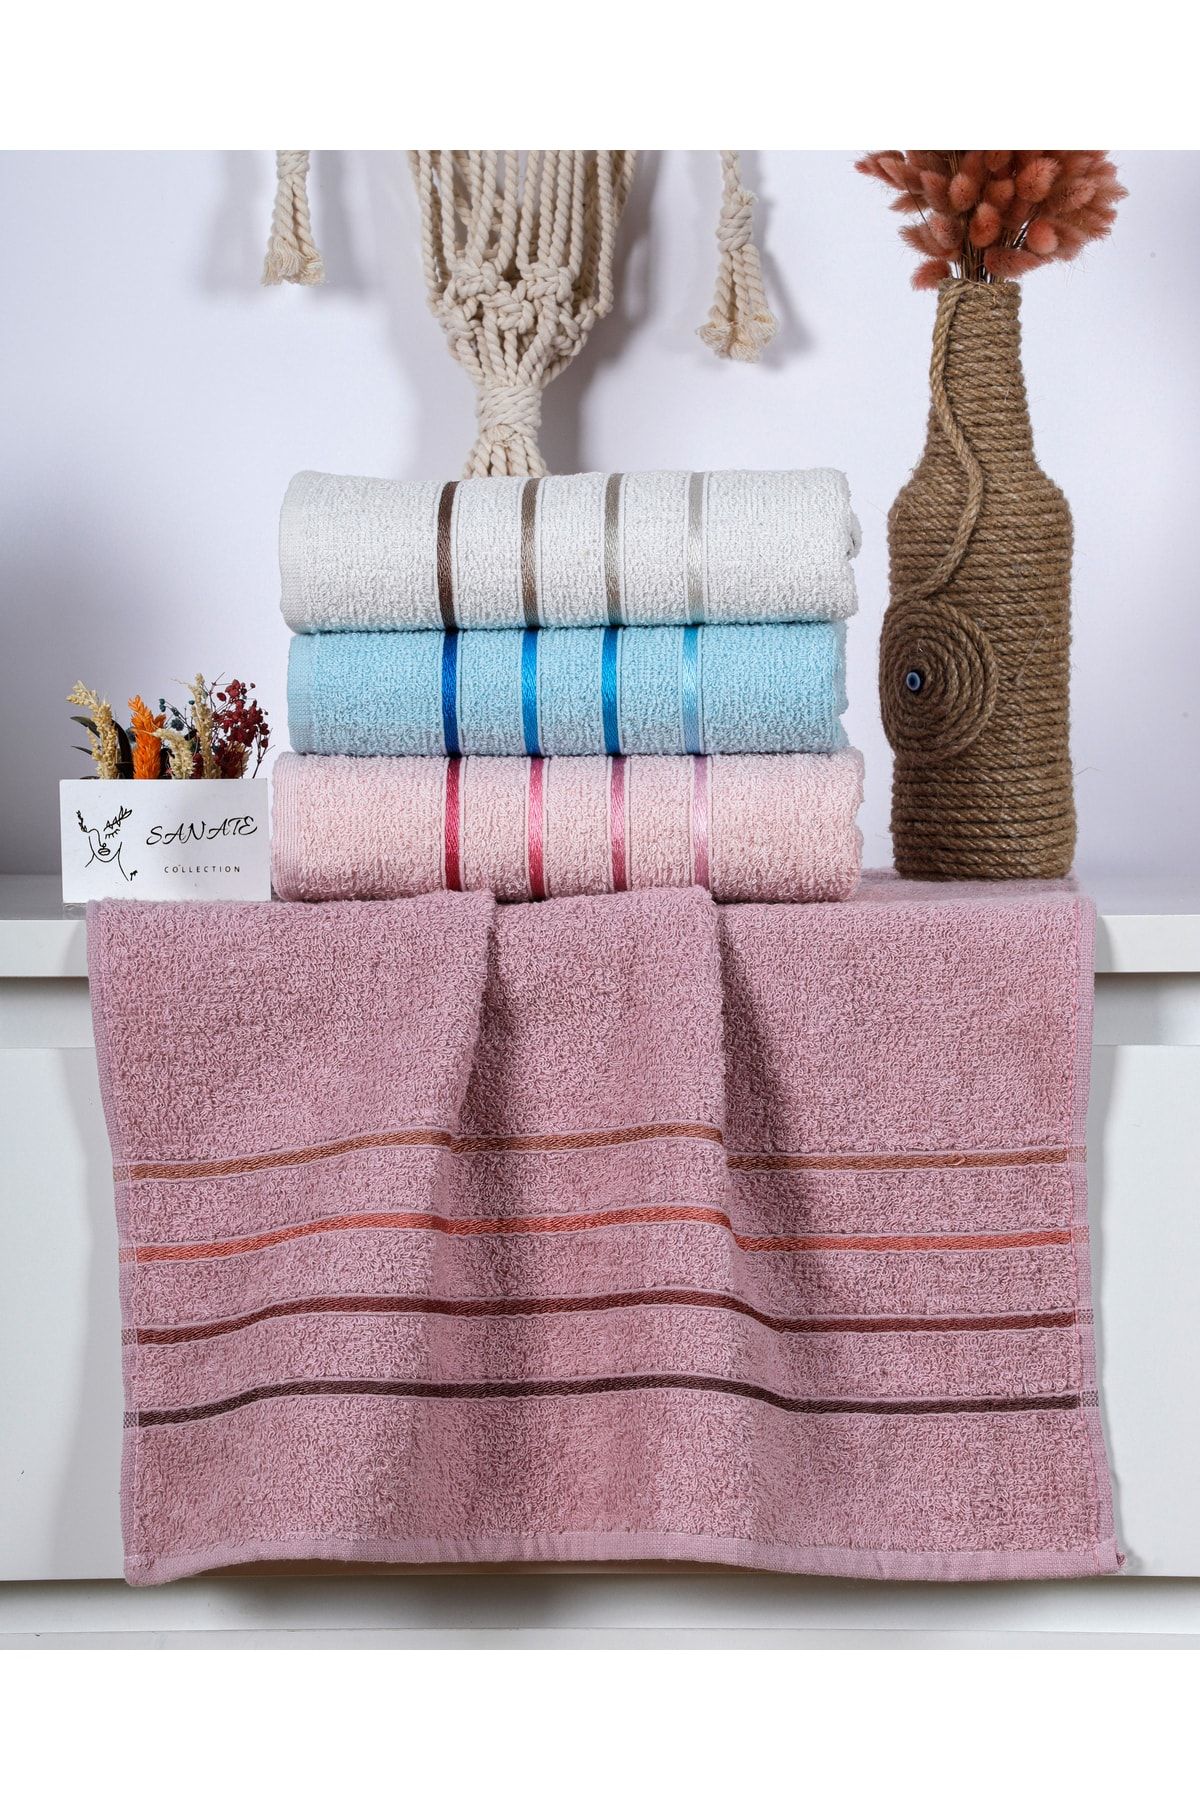 SANATE COLLECTION Towel Patterned Hand and Face Towel Set of 4